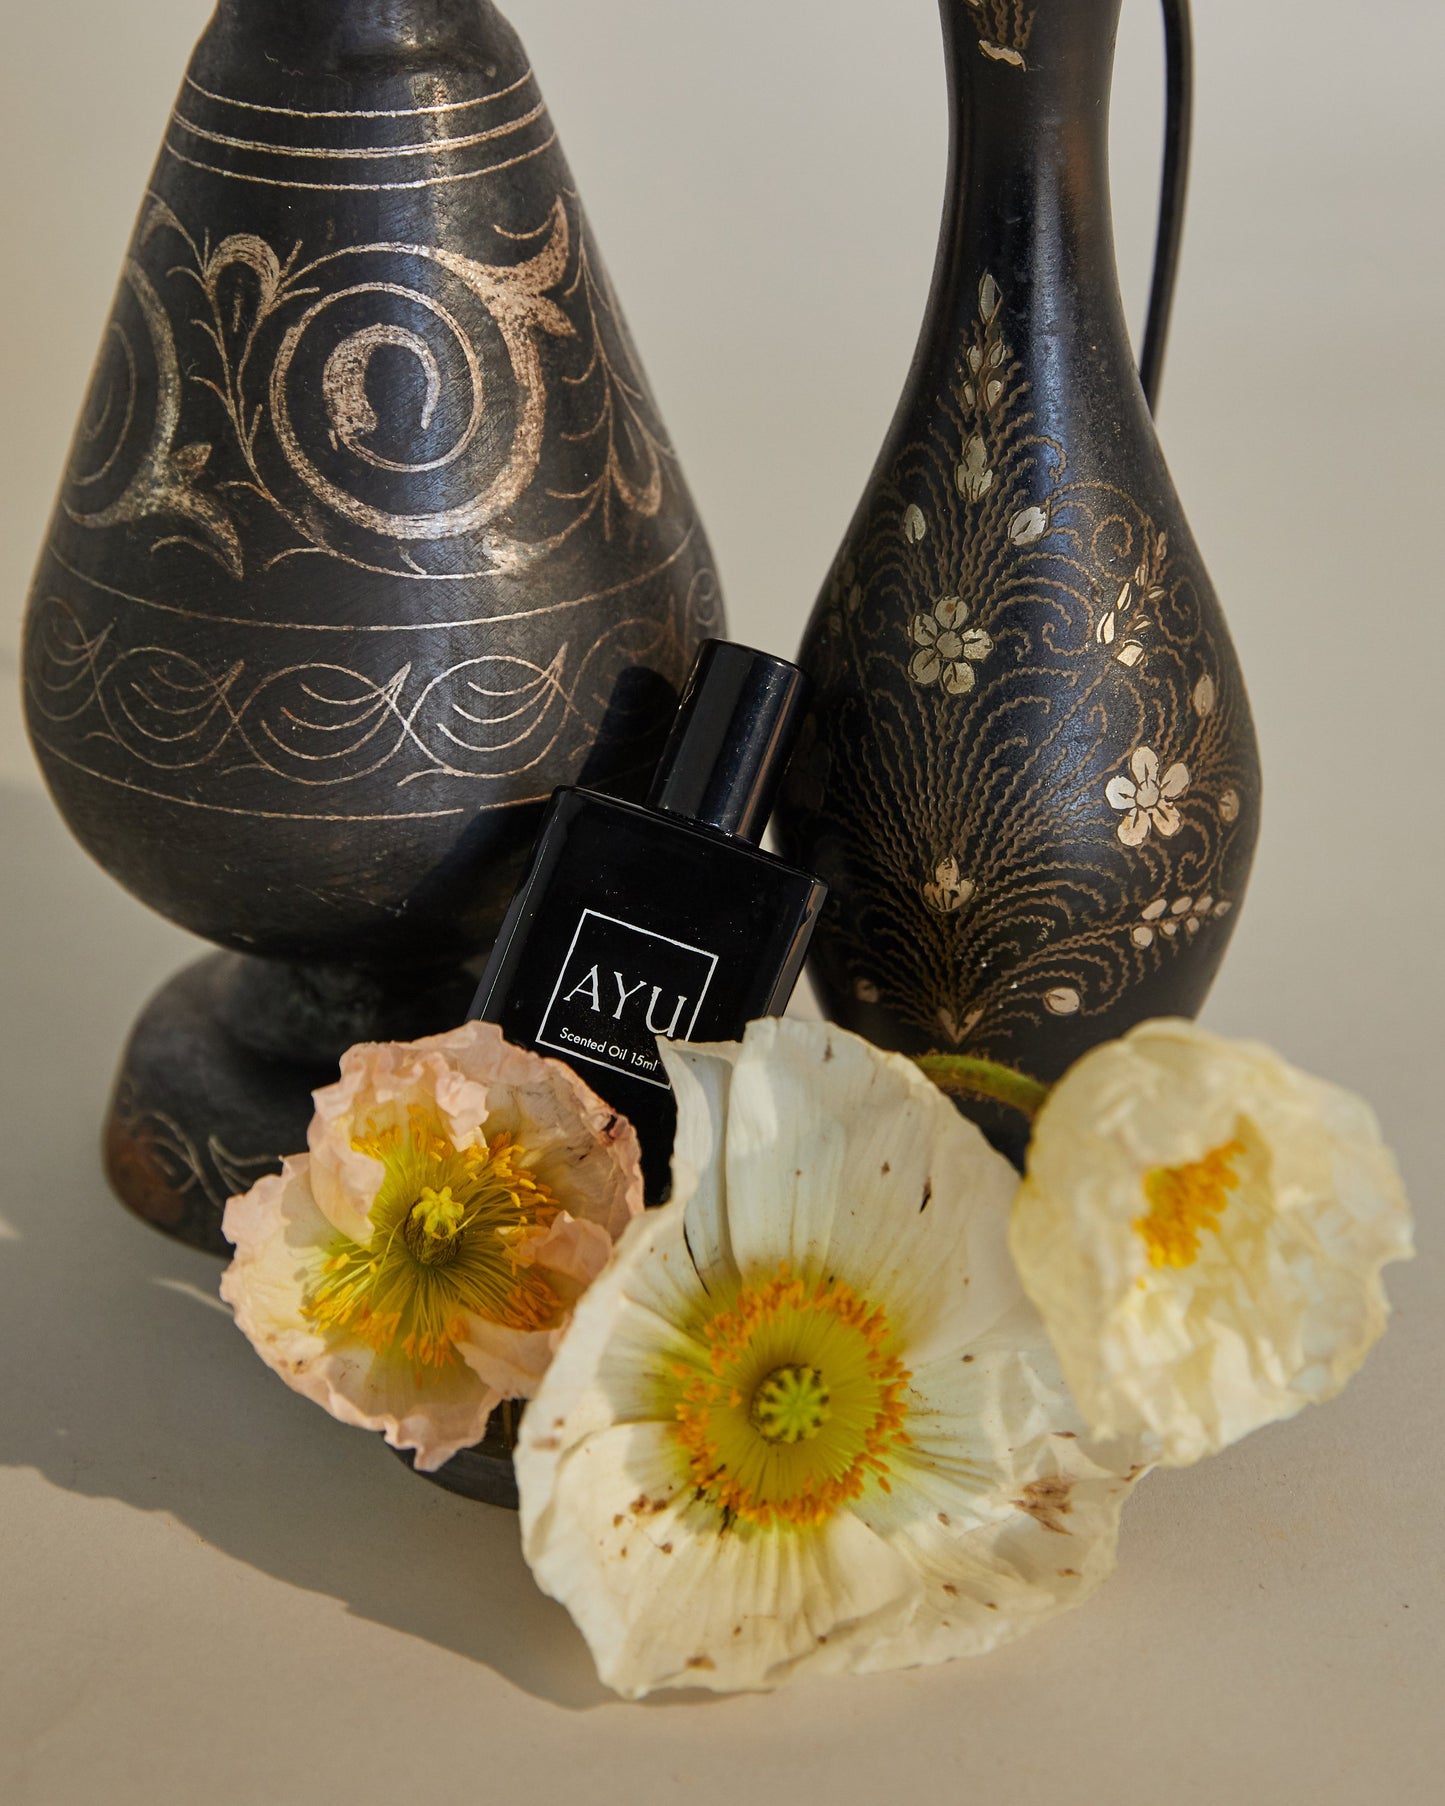 AYU Scented Oil - Ode